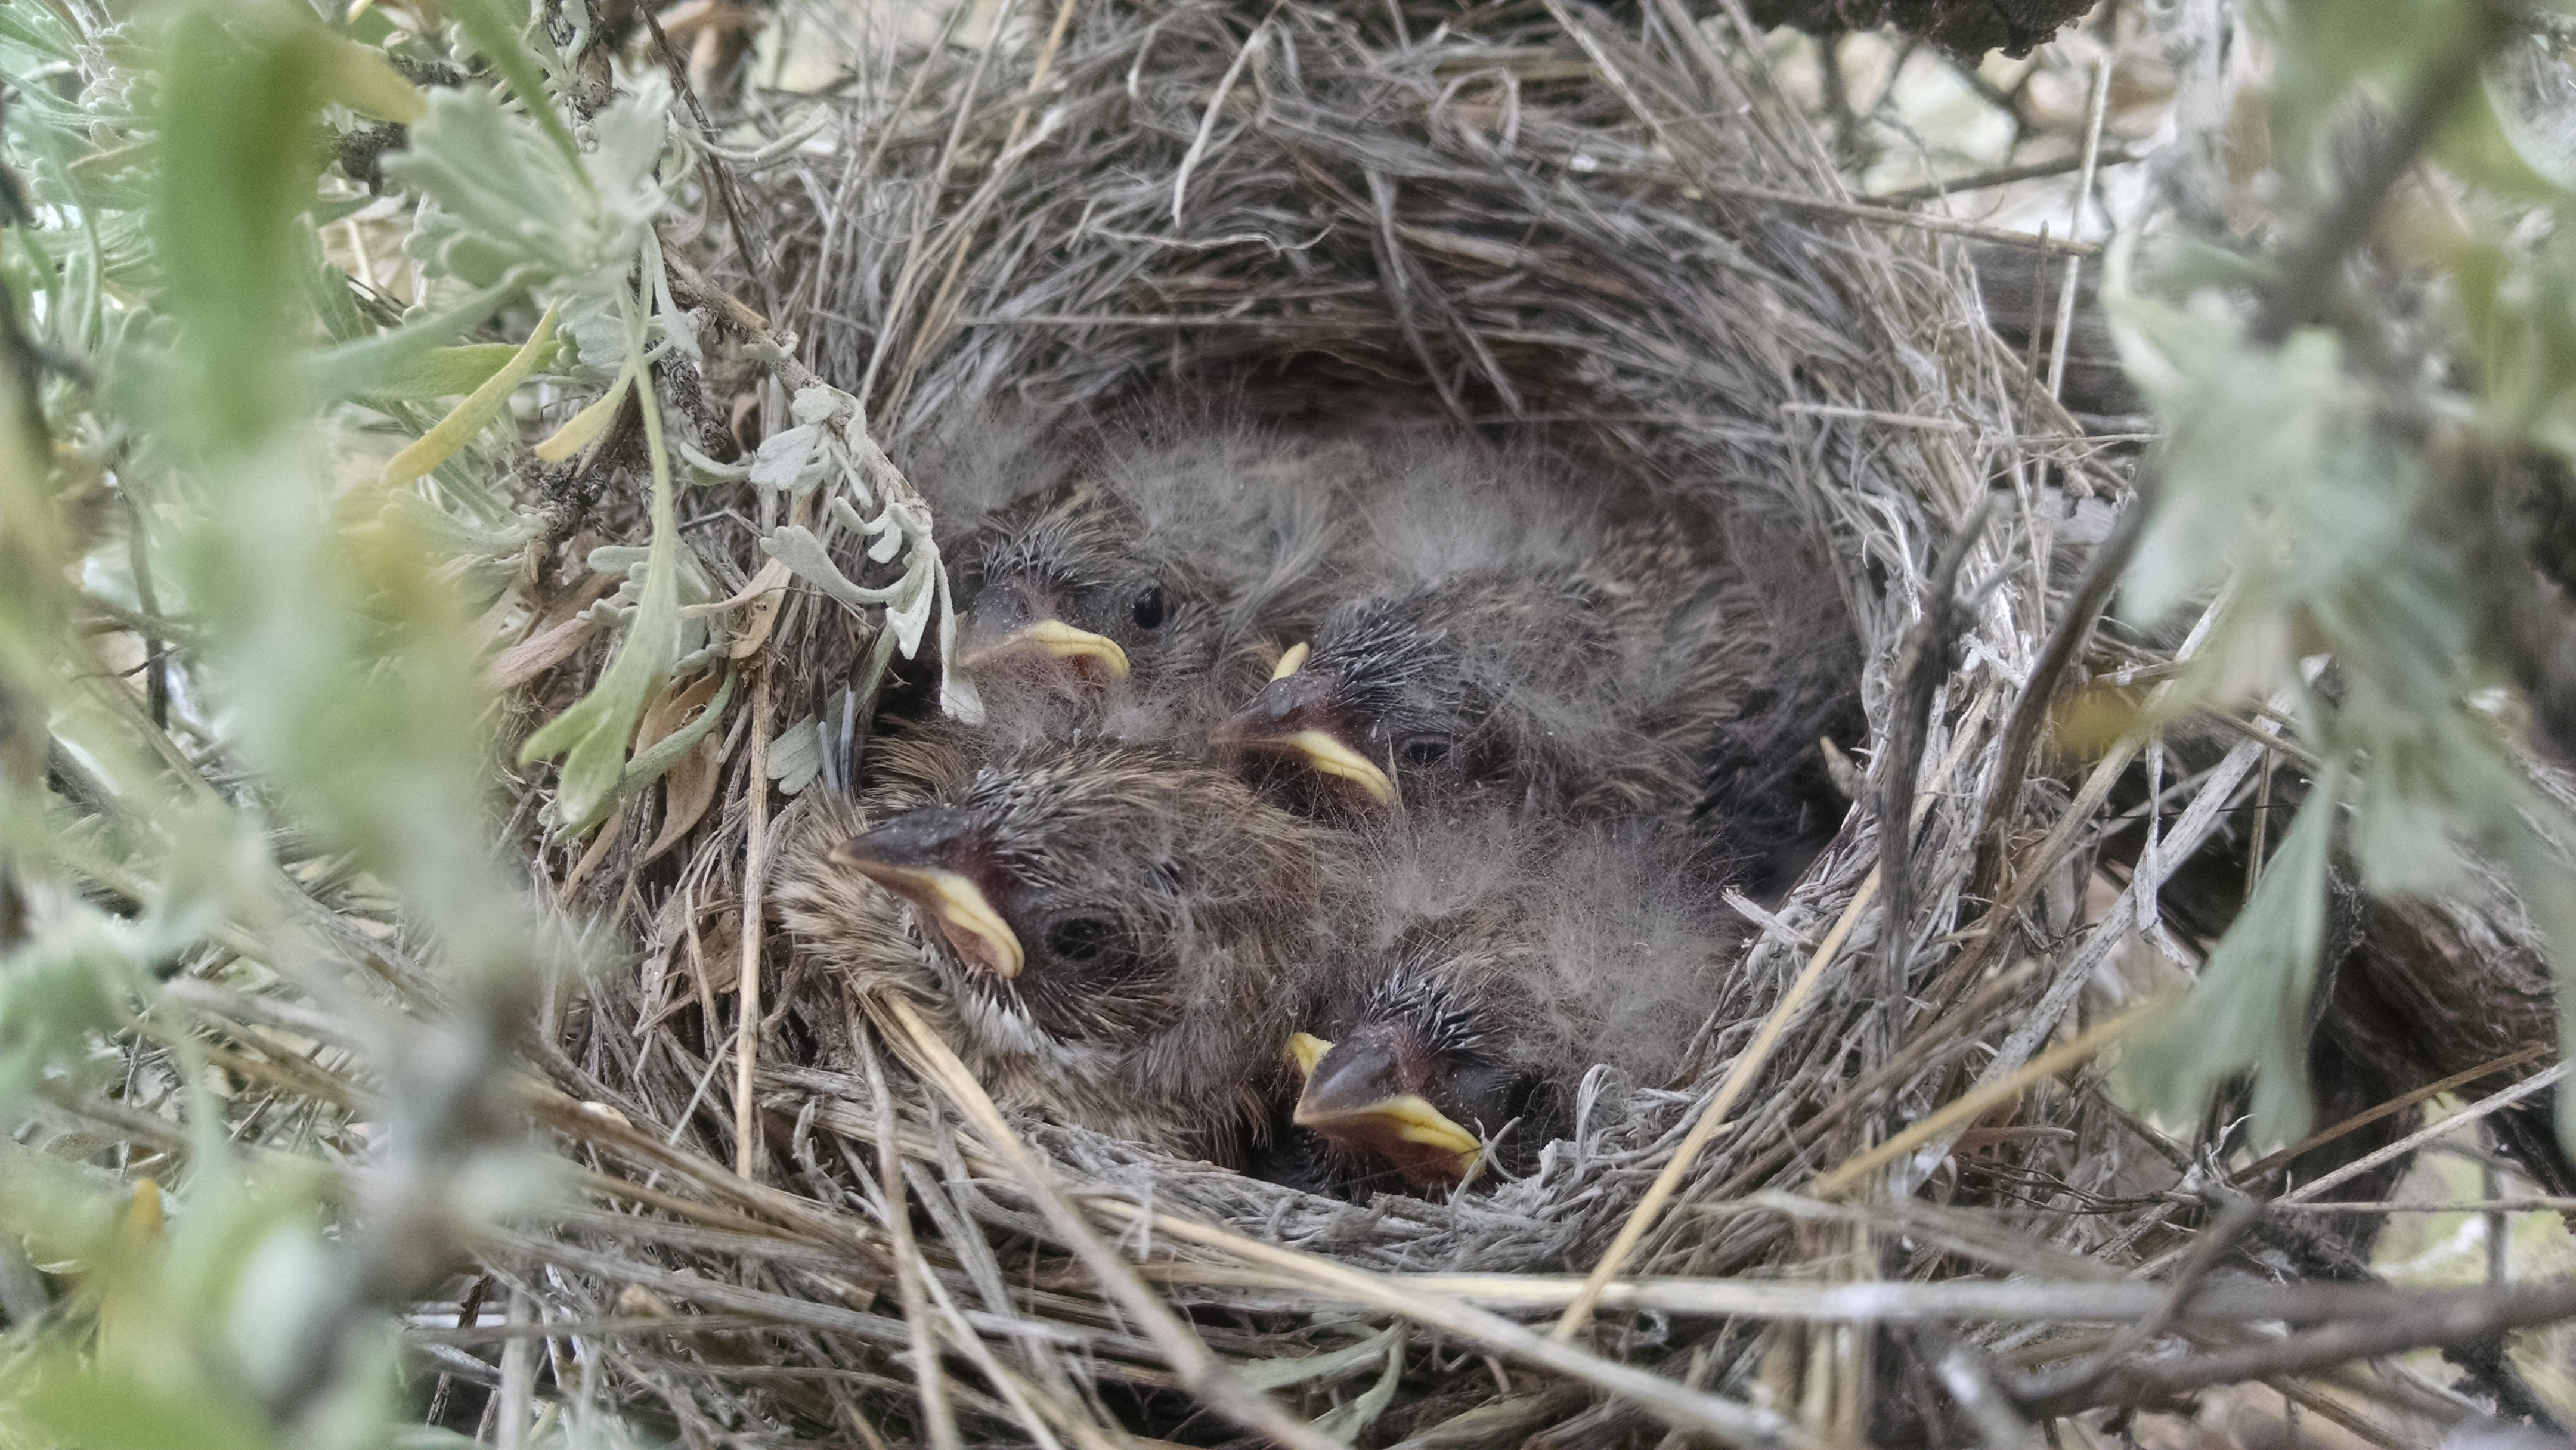 brewer's sparrow nestlings